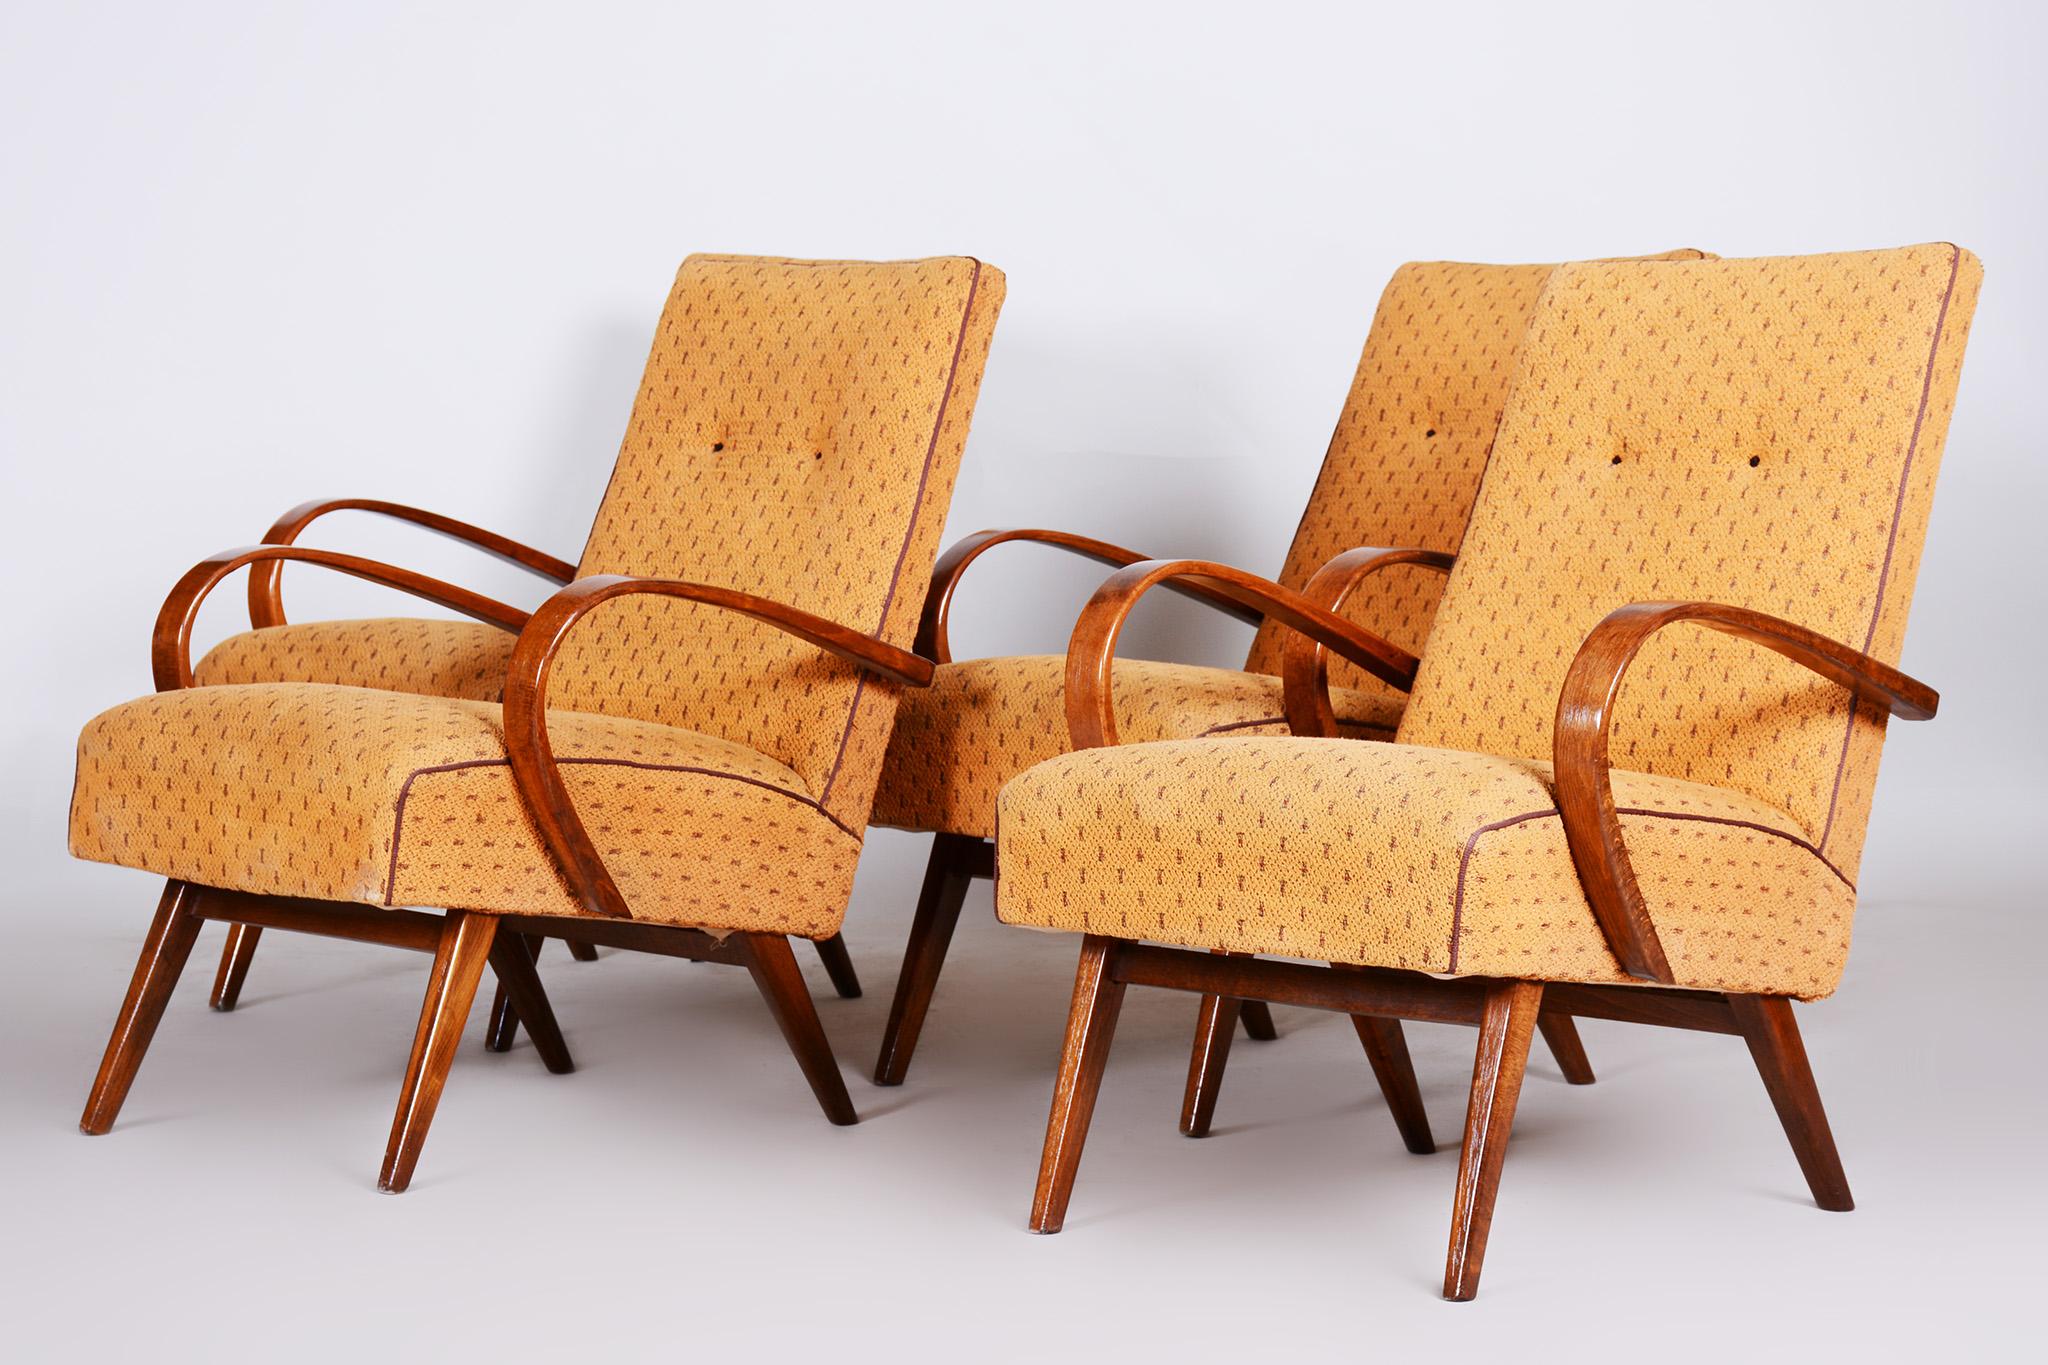 Fabric Four Yellow Mid Century Armchairs Made in 1950s Czechia, Original Condition For Sale